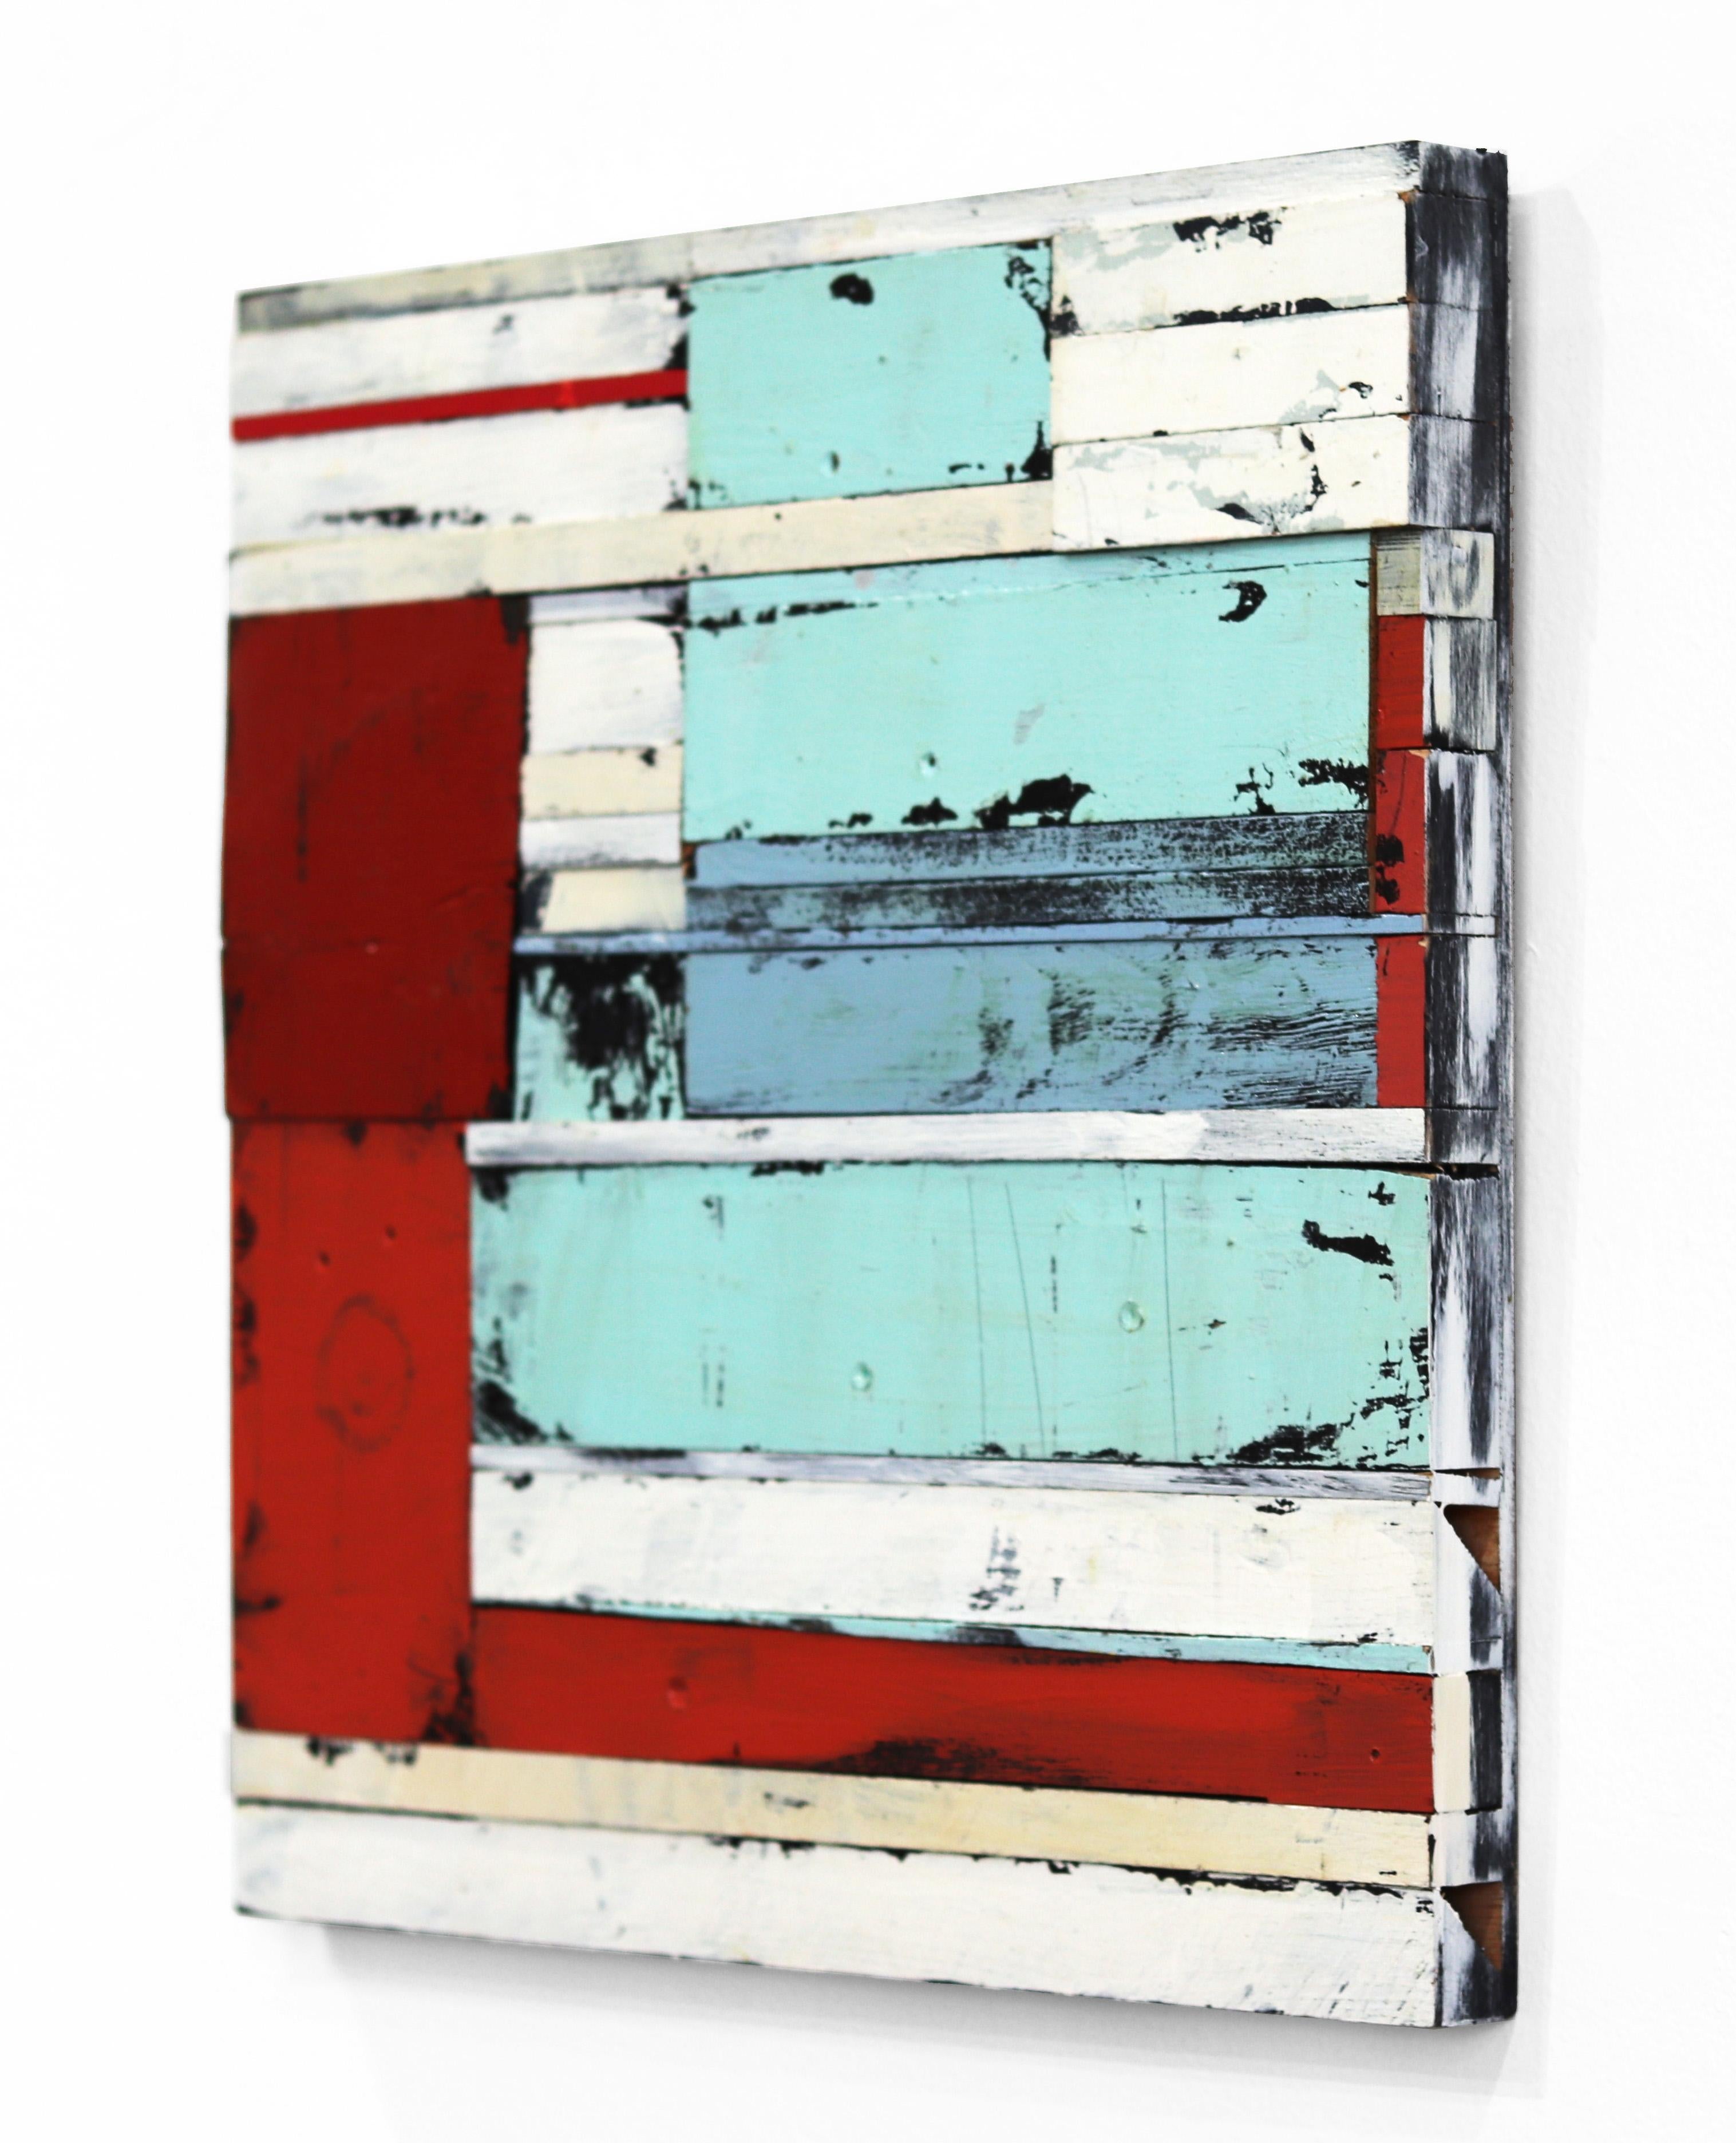 Rebecca Klundt's original artworks are inspired by nature its finite resources. Renewal, order, and lines drive her creative impulses.

This 16 inch square original mixed media artwork is an assemblage of found wood, finished with layers of acrylic